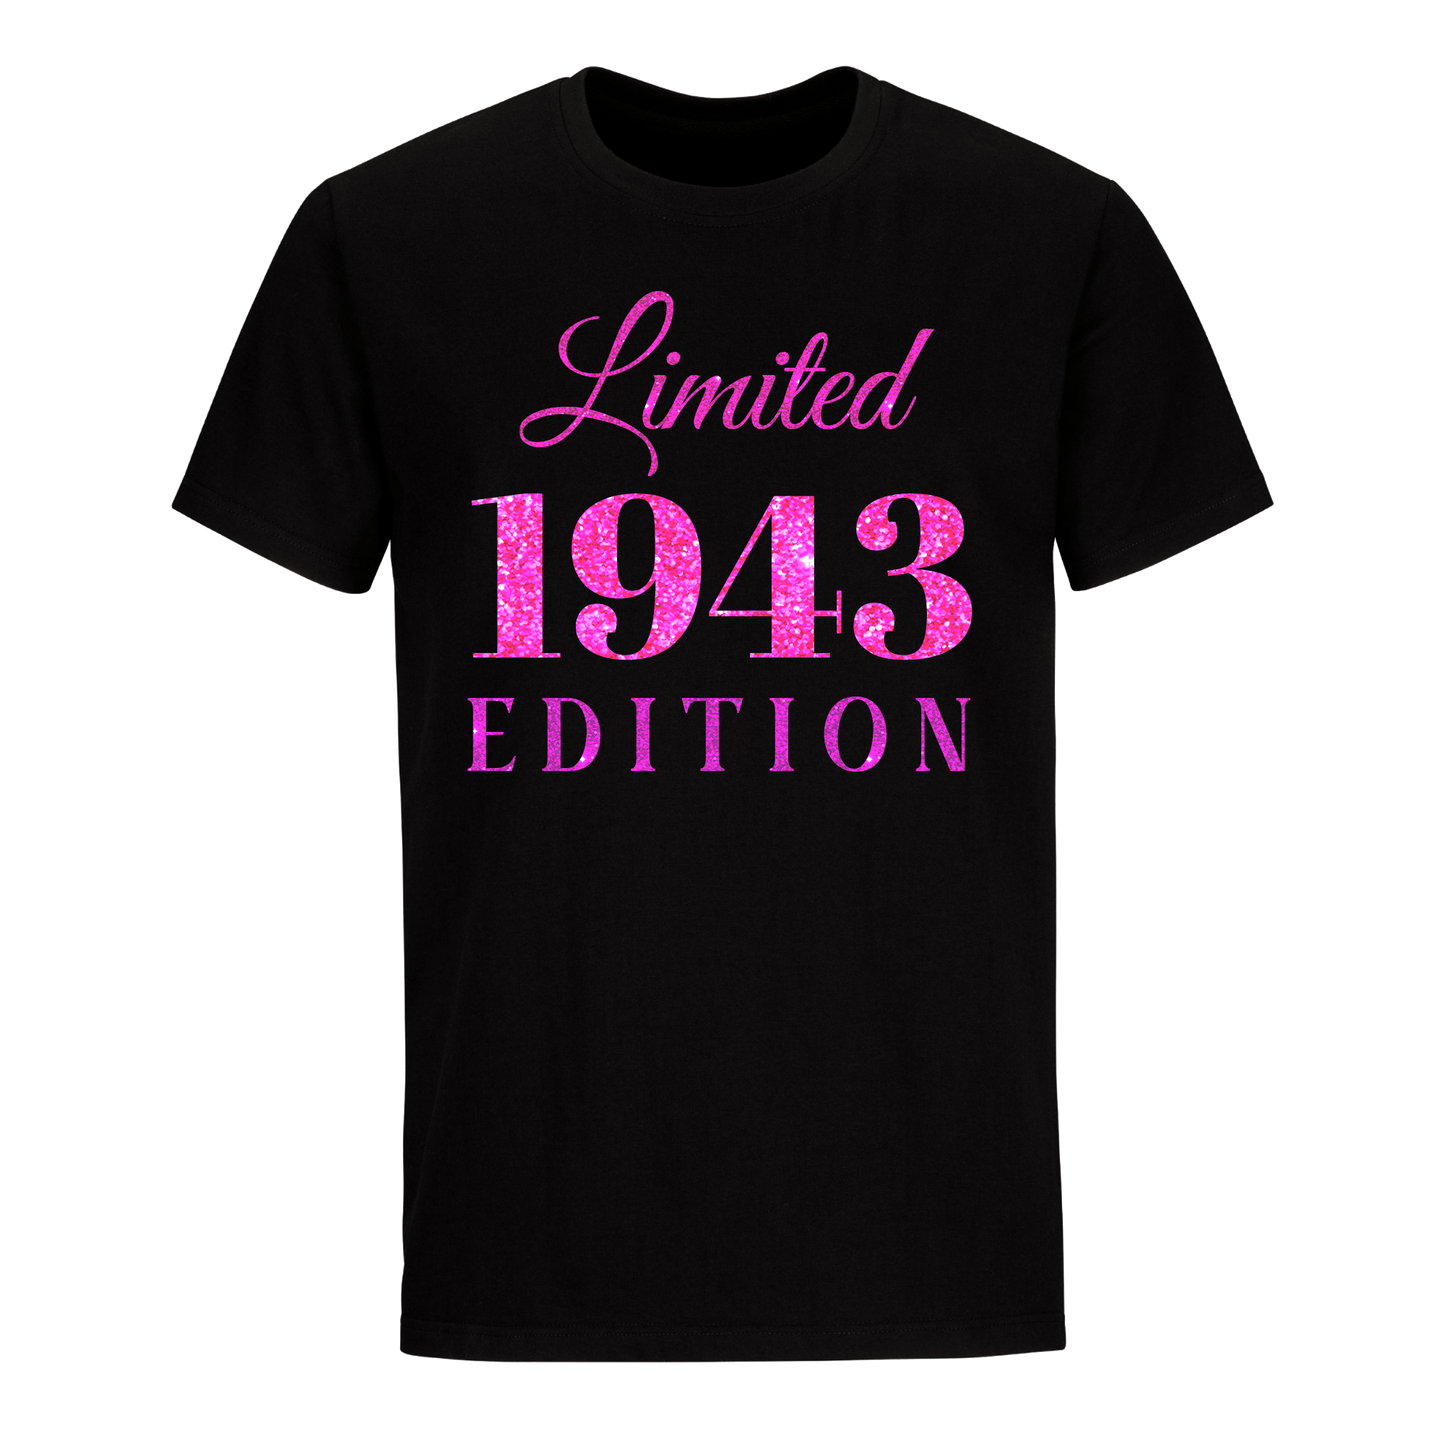 LIMITED EDITION 1943-80 FRONT AND BACK DESIGN UNISEX SHIRT